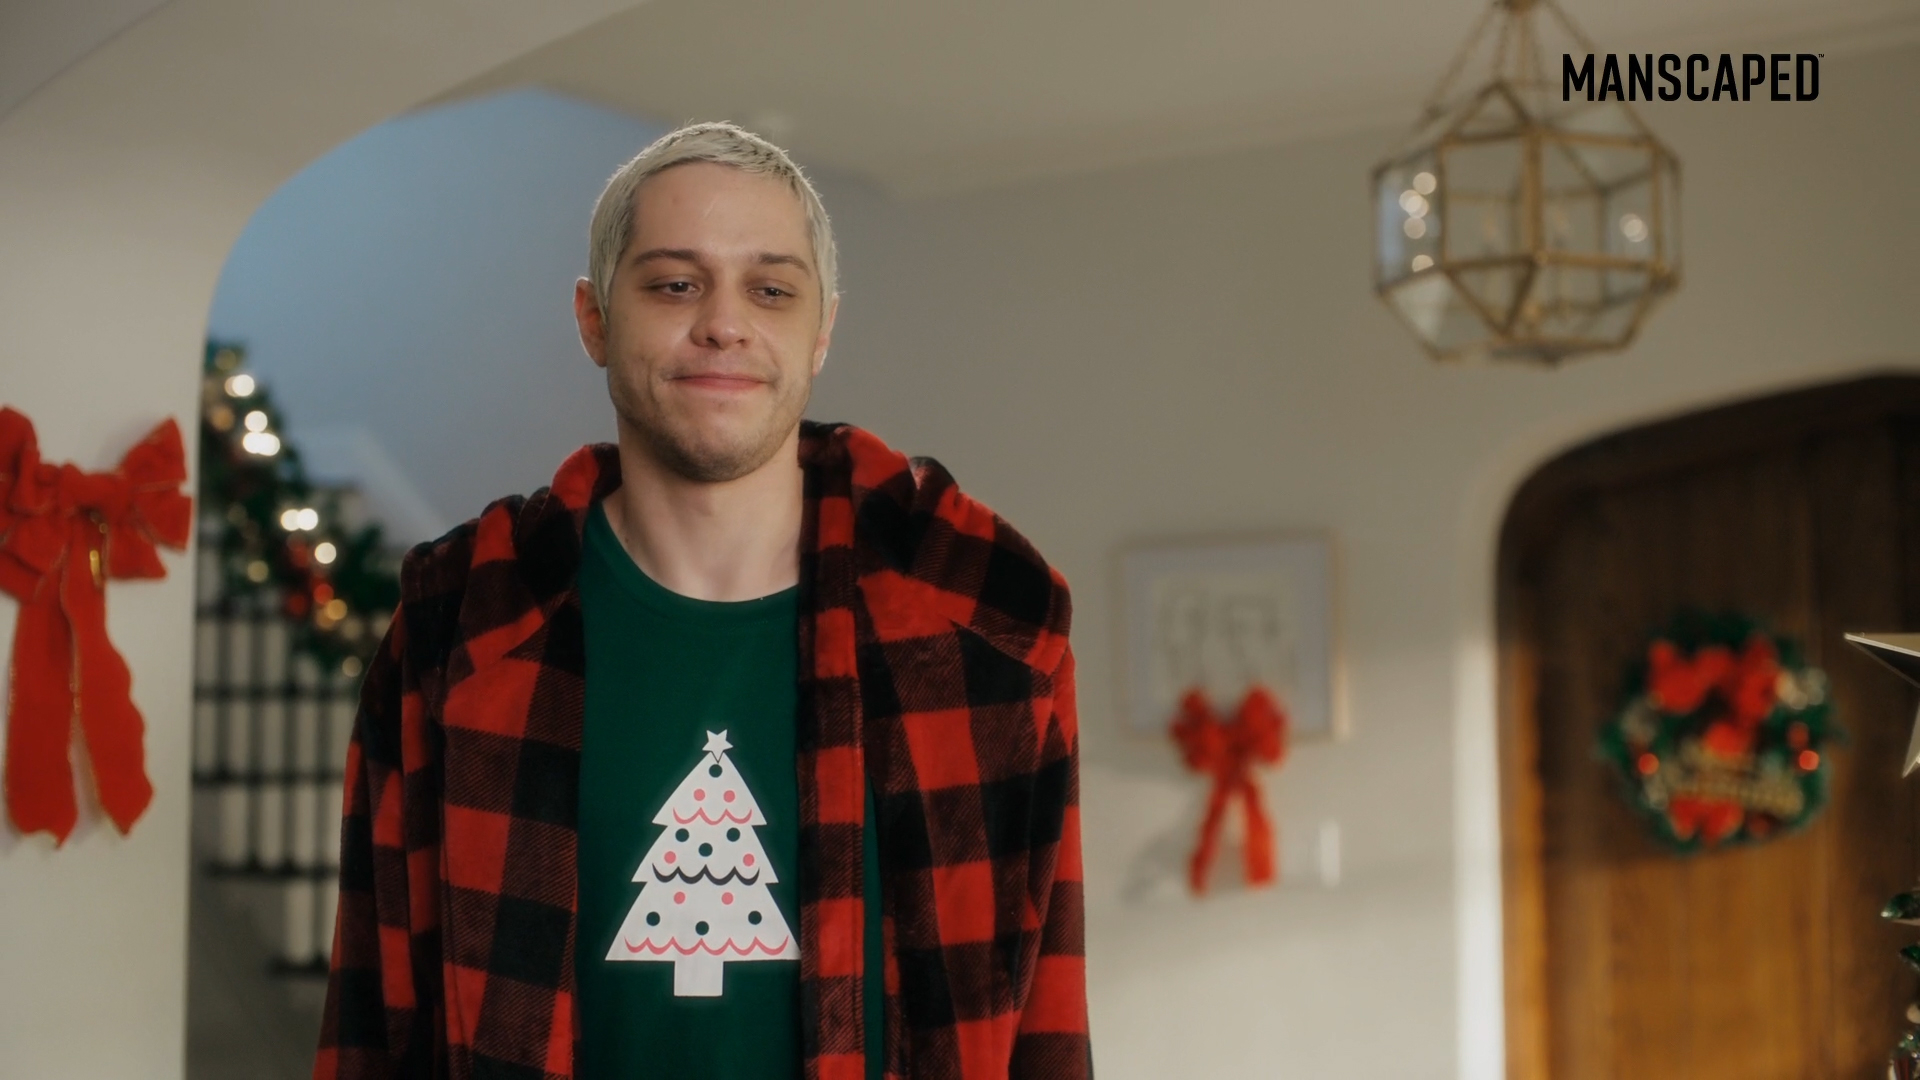 The Pete Davidson x MANSCAPED brand partnership takes on the holidays with newest spot aptly titled, “Season’s Groomings.” (Video: MANSCAPED)